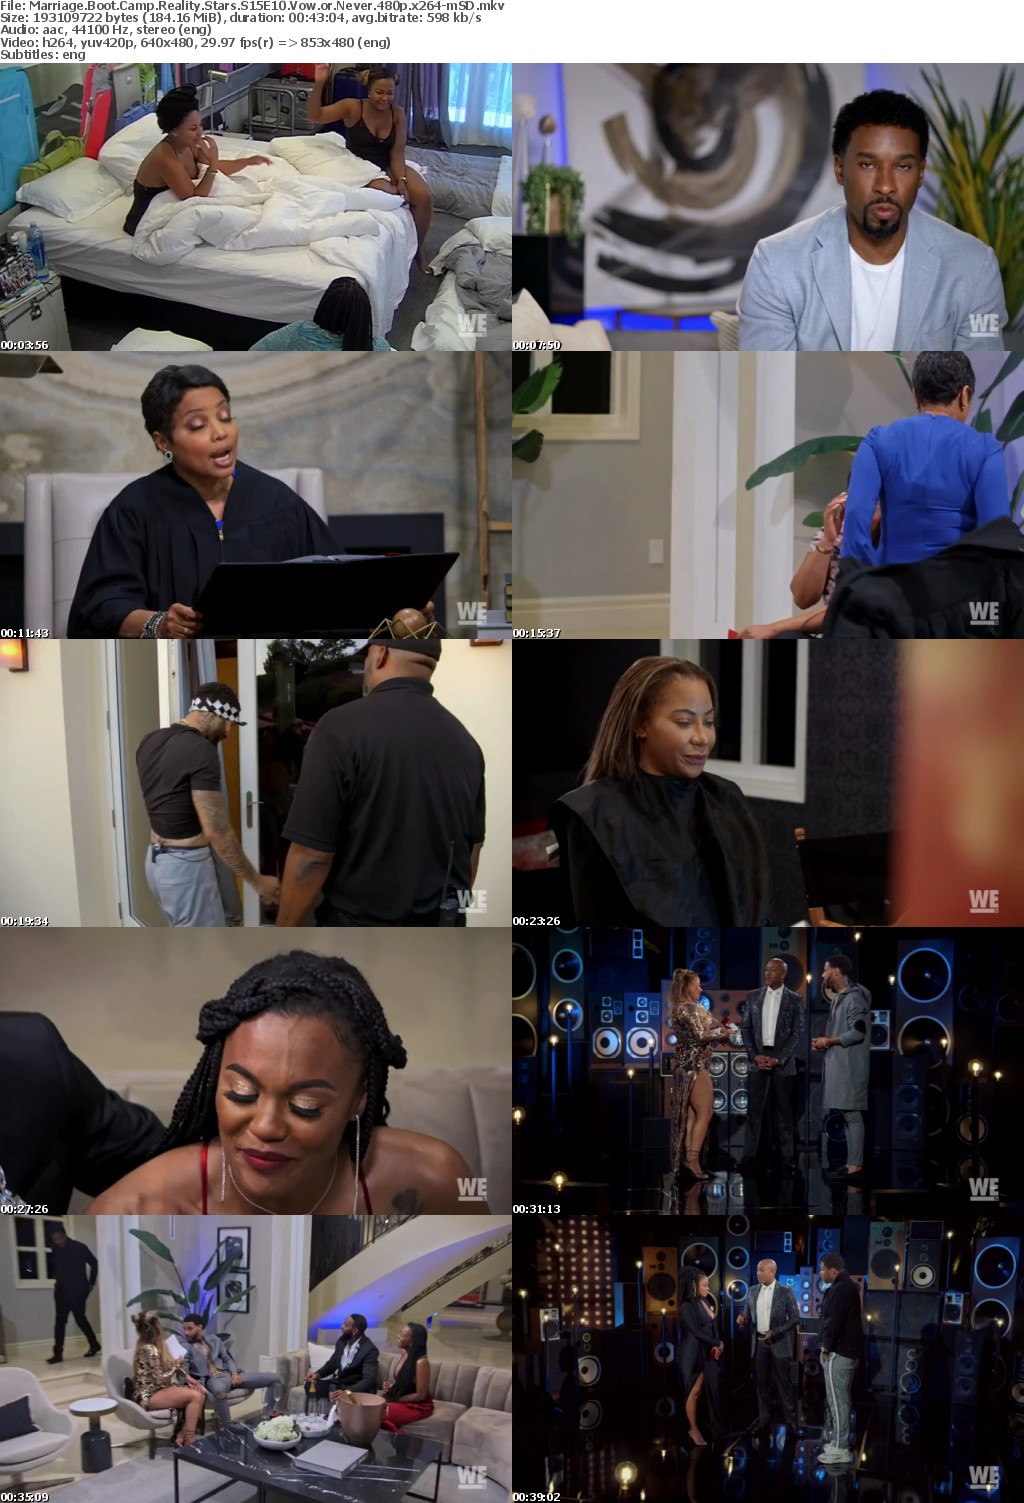 Marriage Boot Camp Reality Stars S15E10 Vow or Never 480p x264-mSD